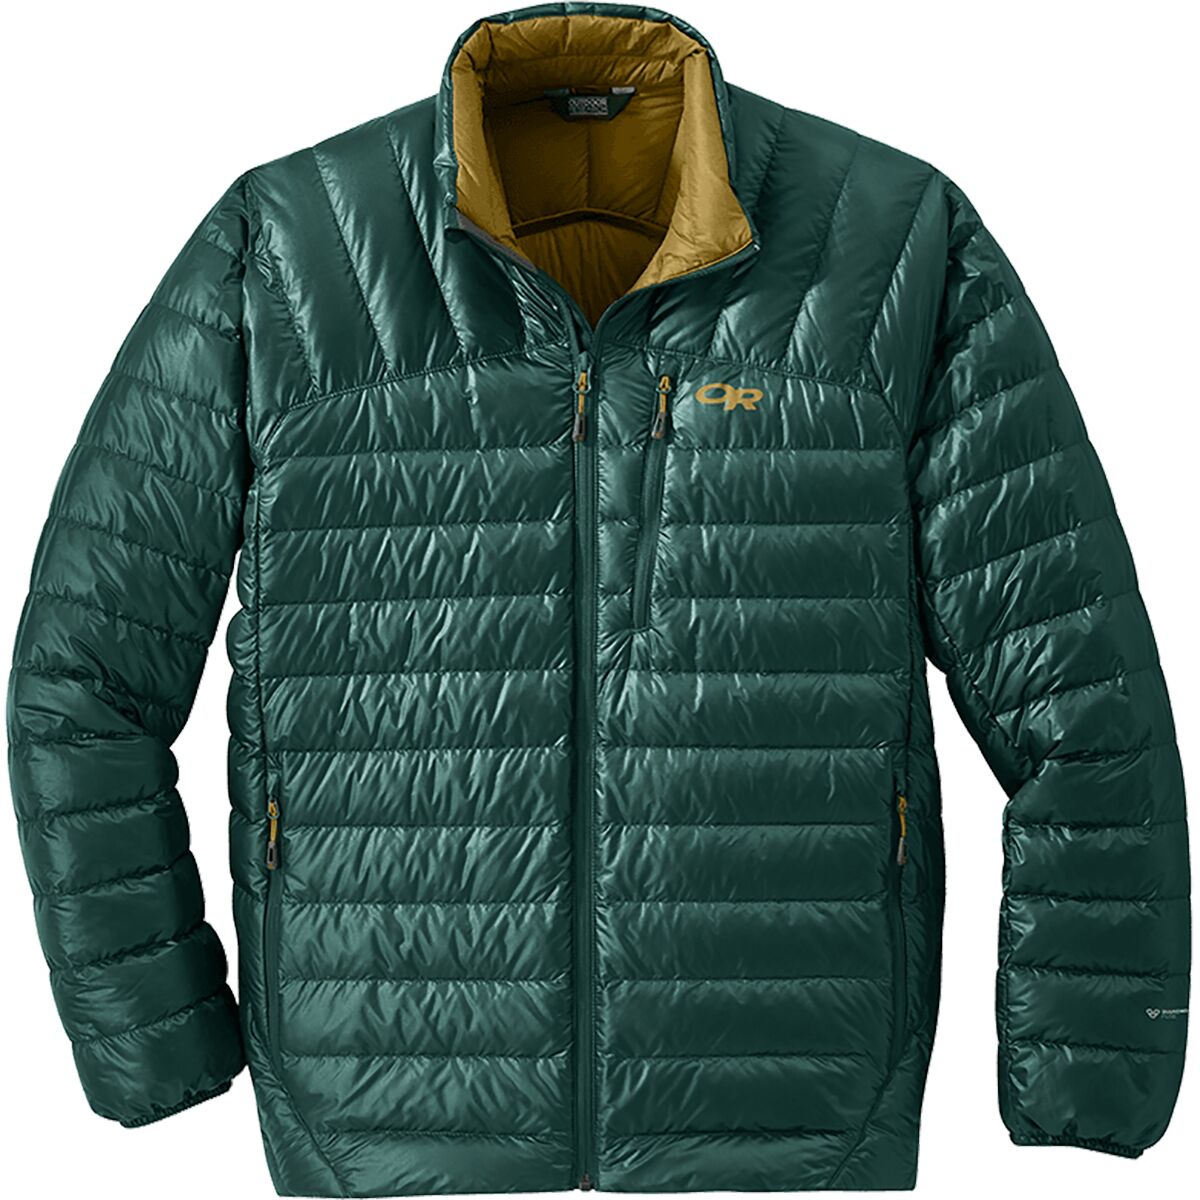 Outdoor Research Helium Down Jacket - Men's | Backcountry.com